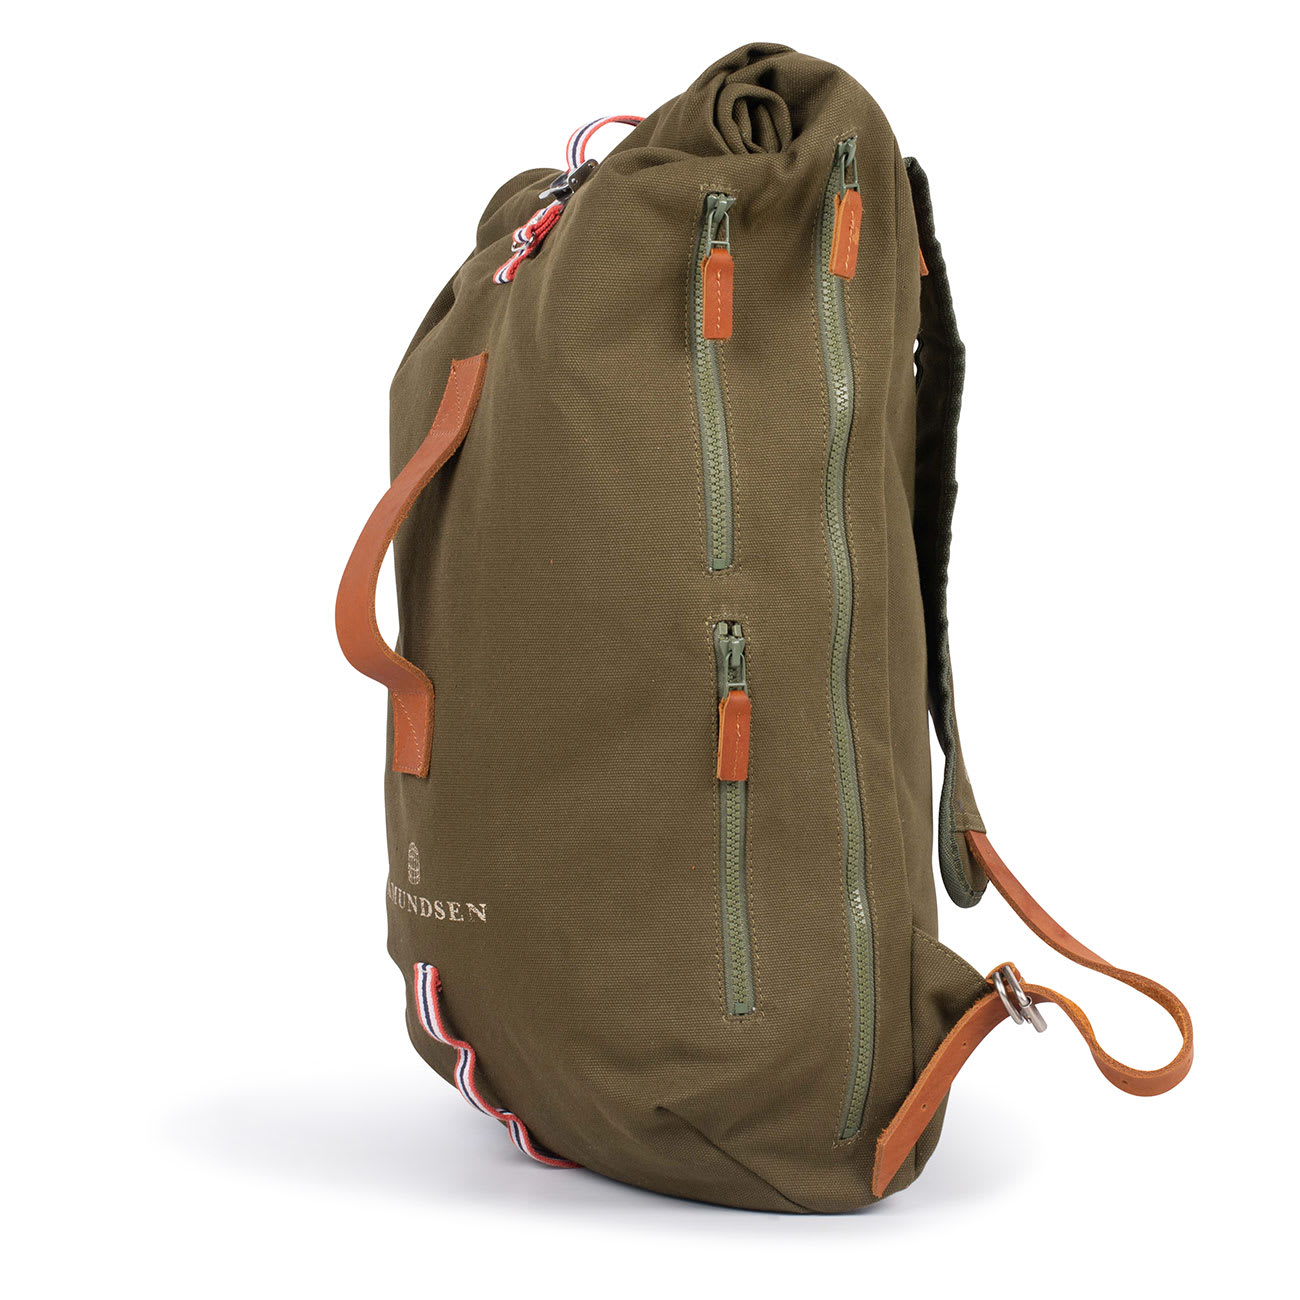 Day Pack 25L | Sports | Shop